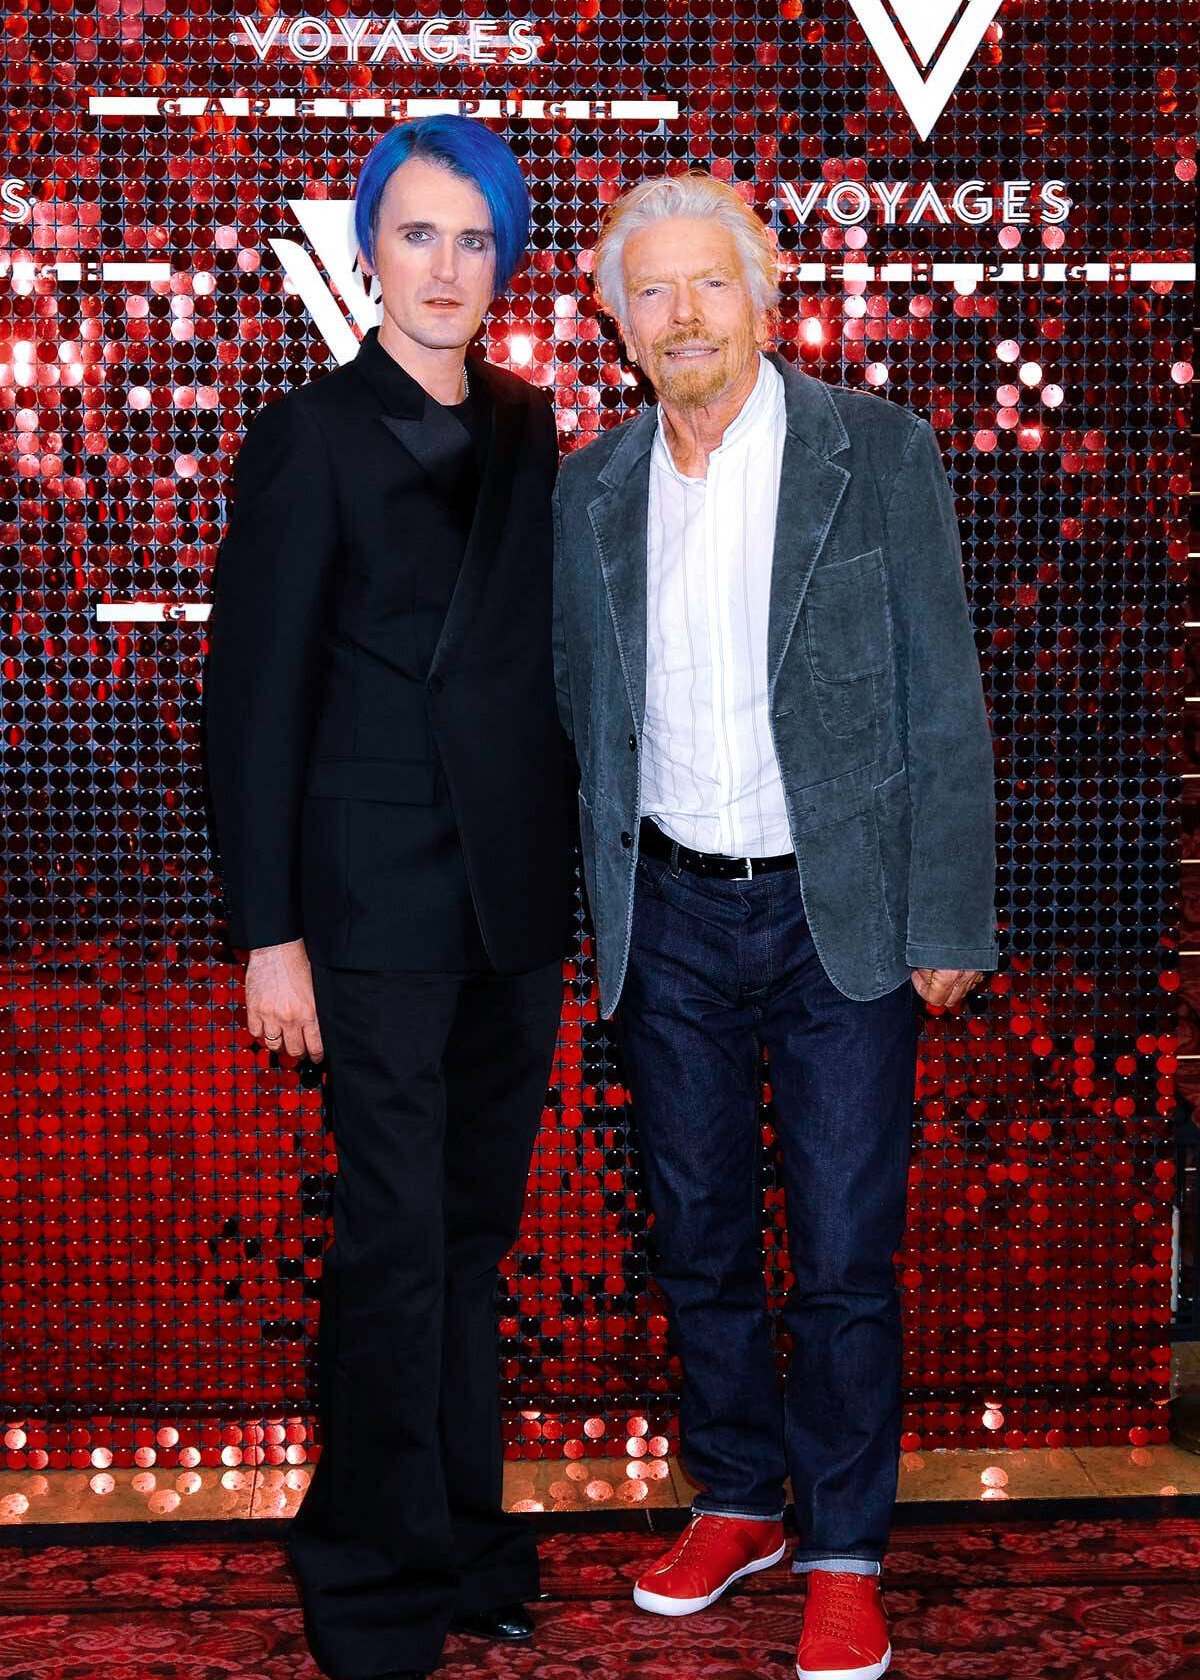 Gareth Pugh and Richard Branson at a Virgin Voyages Photoshoot with a red sequin backdrop at a luxury party